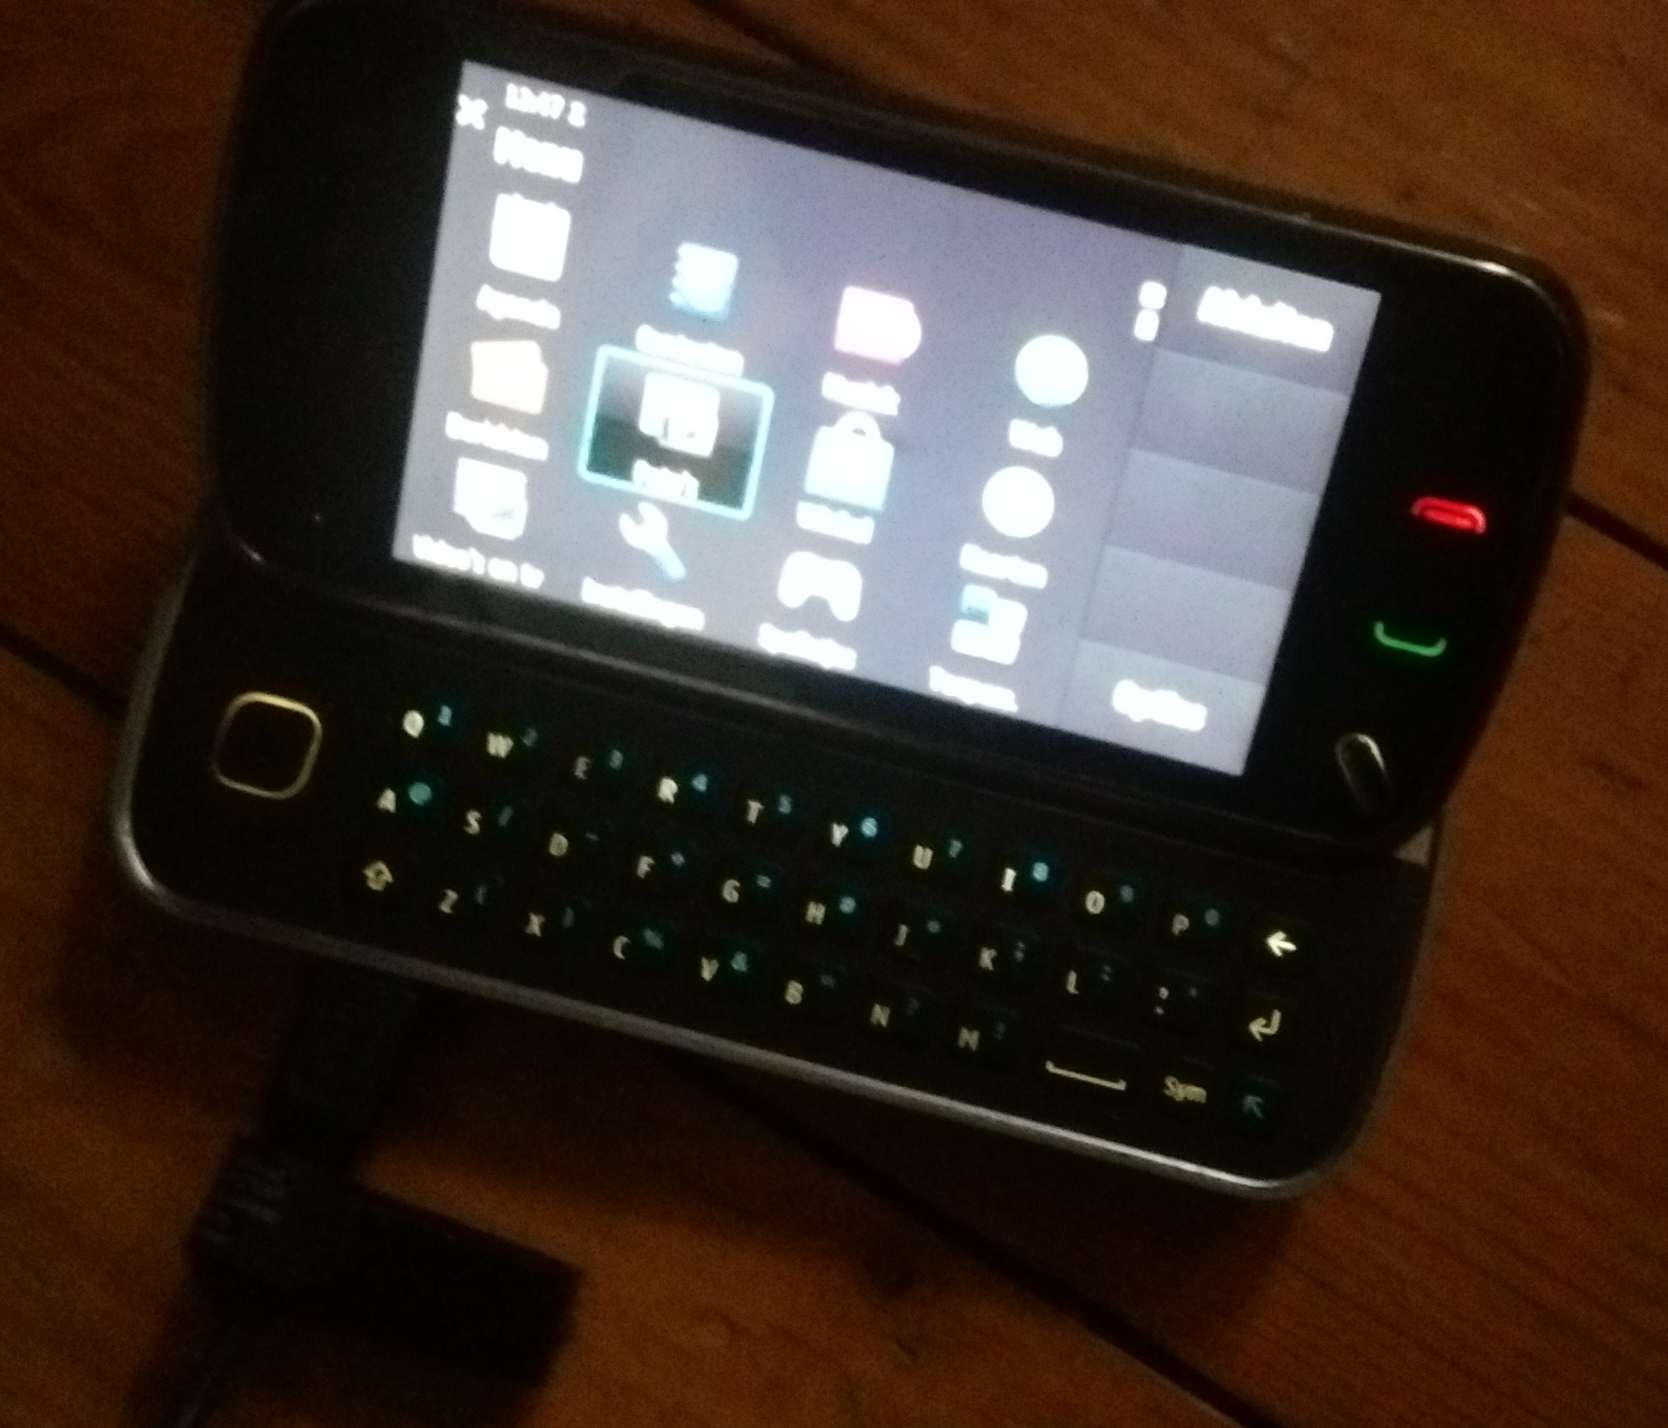 photo of the Nokia N97 with the keyboard expanded, which was taken with the Moto E (2015)